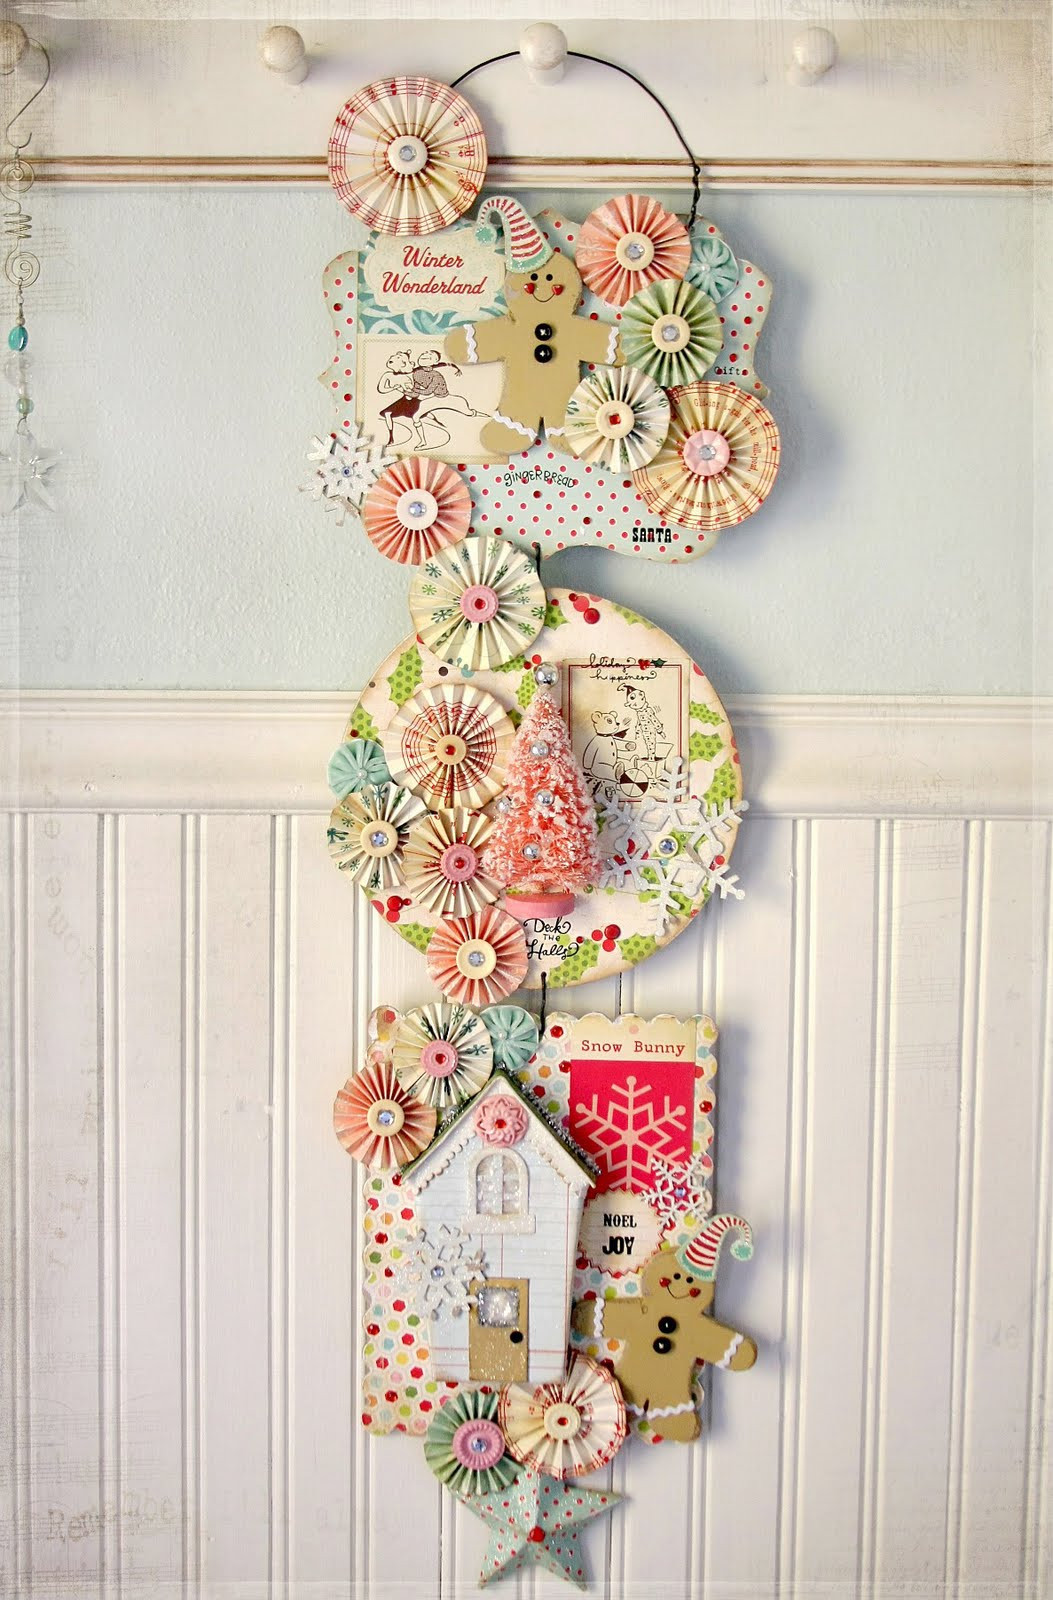 Christmas Wall Decor
 Ally Scraps "Vintage Christmas Wall Swag" by Linda Albrecht